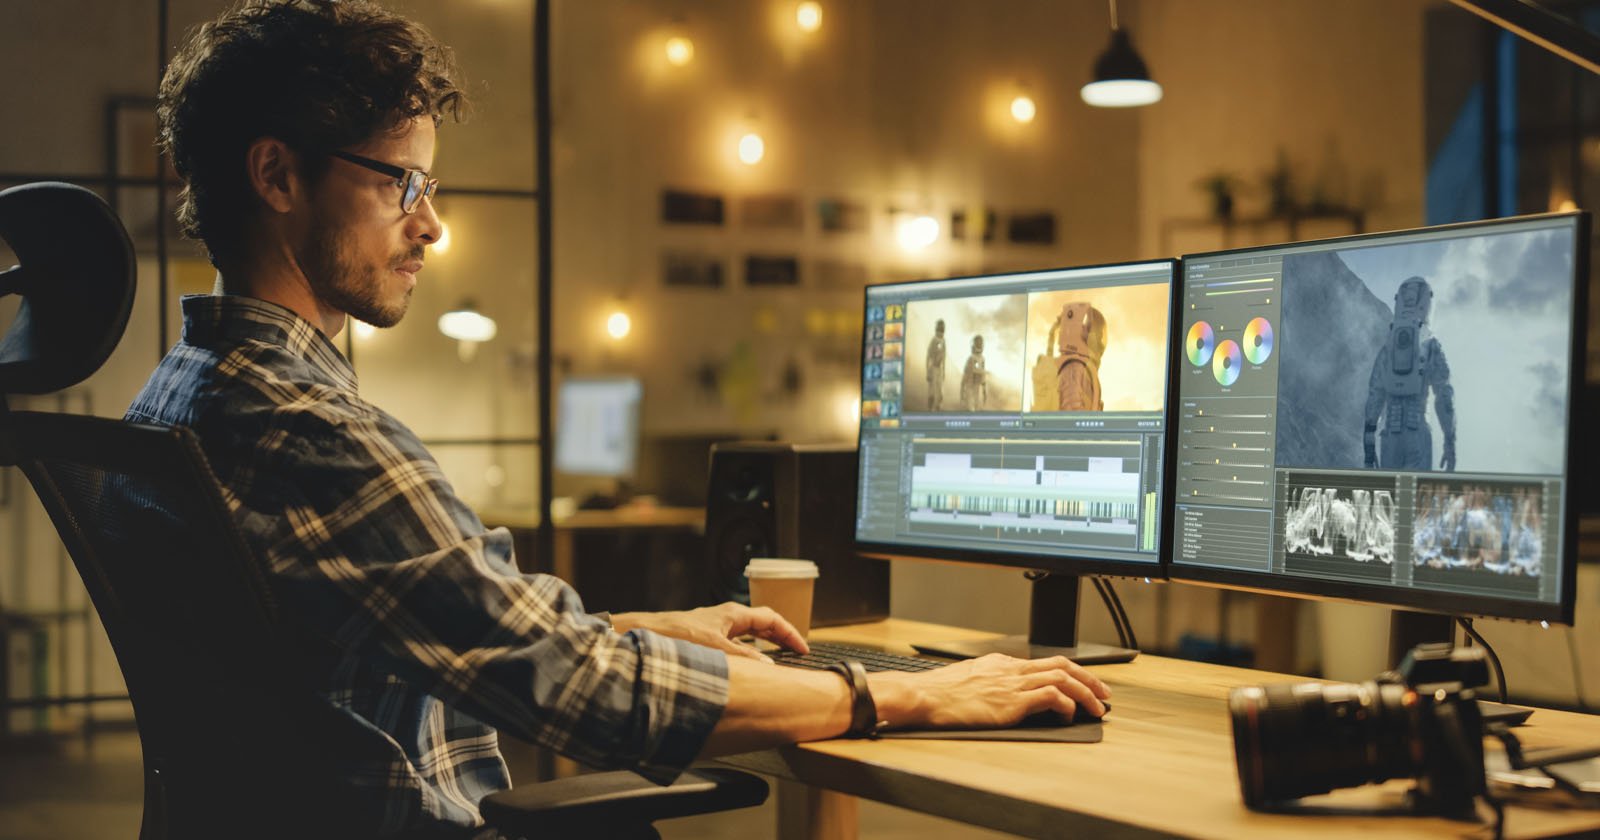 Premiere Pro Can Now Export Video 10x Faster on Both Mac and PC